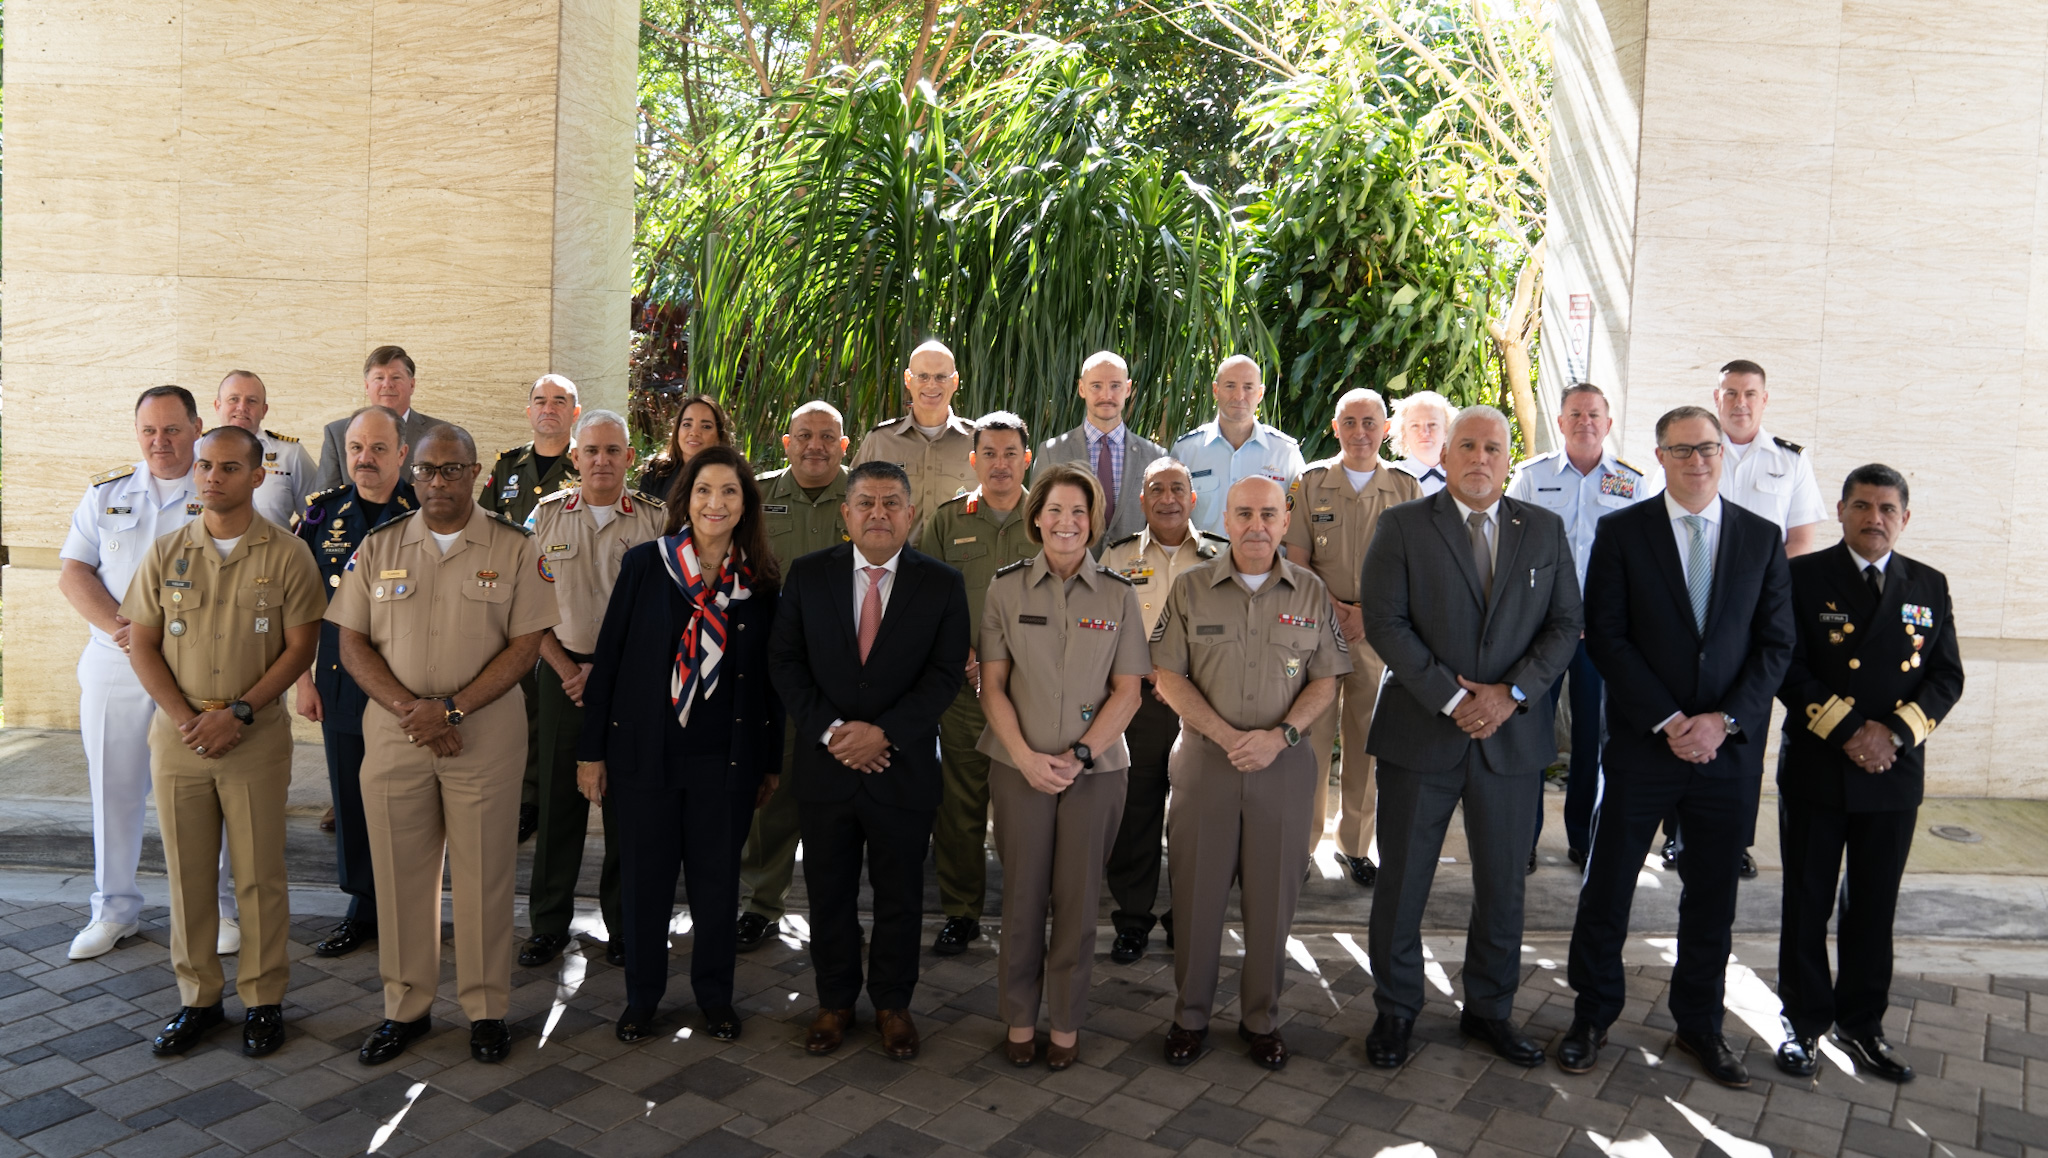 CENTSEC Discusses Collaboration Opportunities to Address 21st Century Challenges